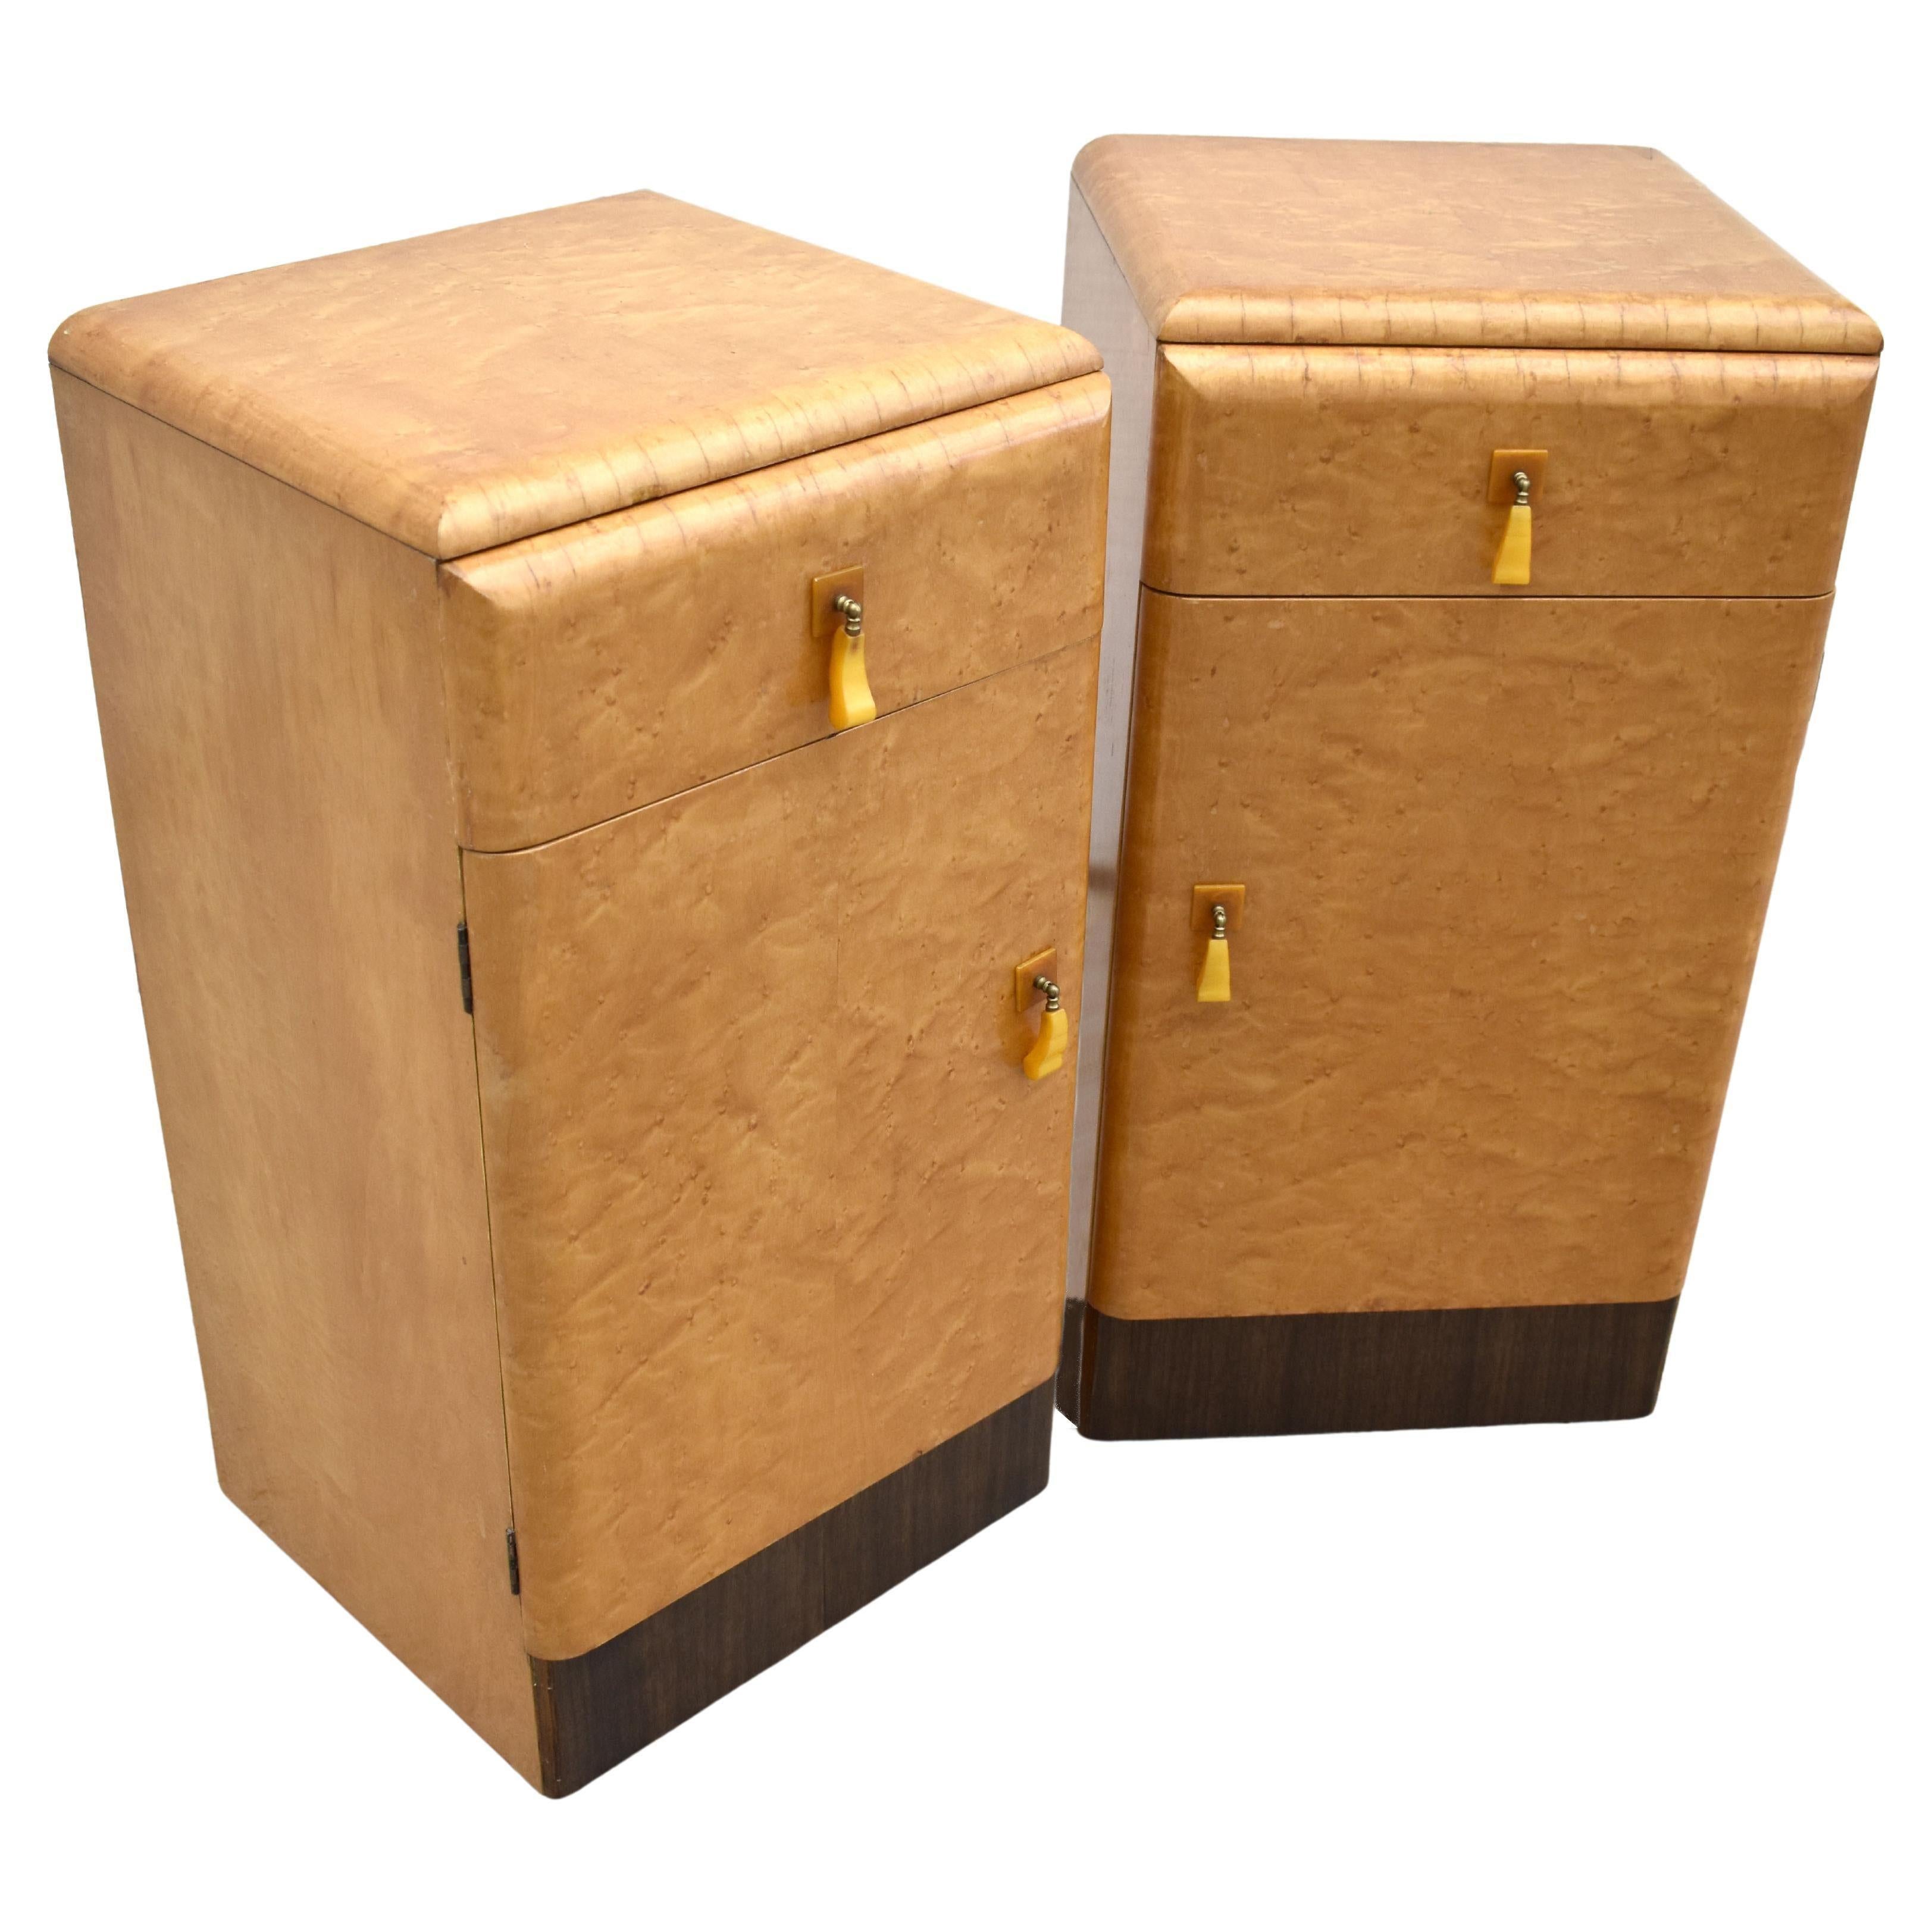 English Art Deco Pair of Matching Bedside Cabinets in Blonde Maple, circa 1930s